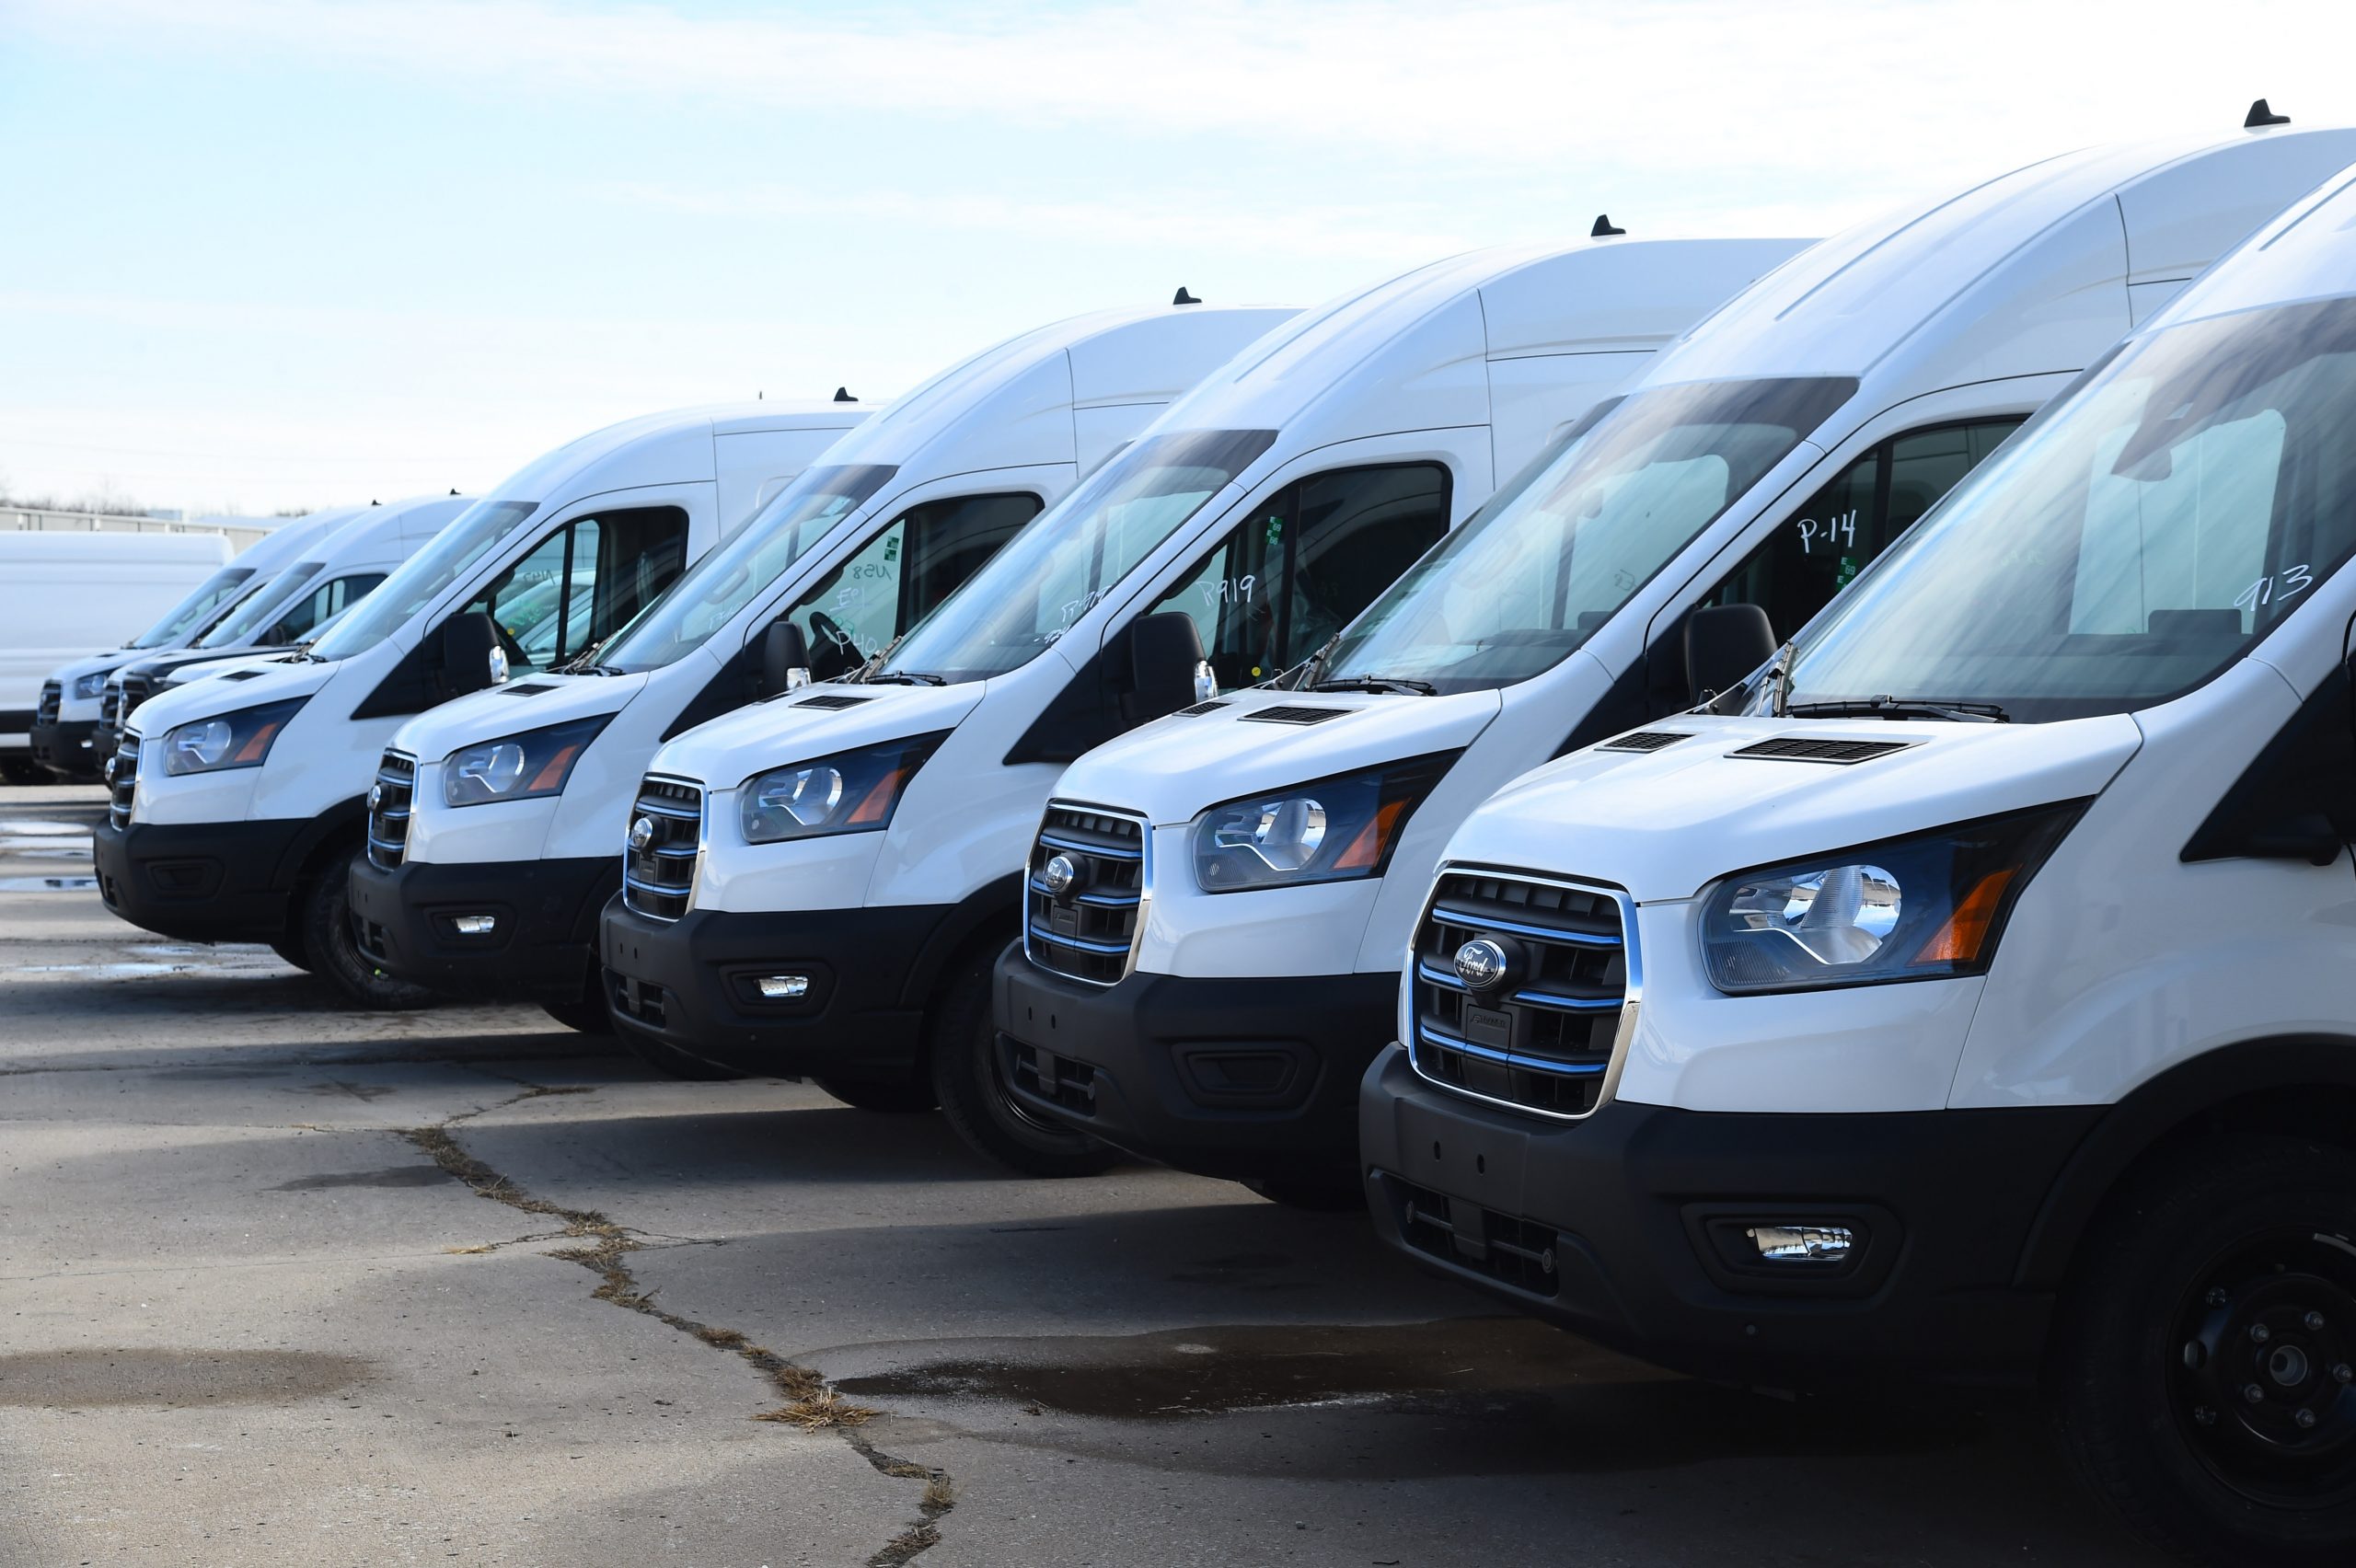 Ford wins contract to supply USPS with E-Transit mail delivery vehicles